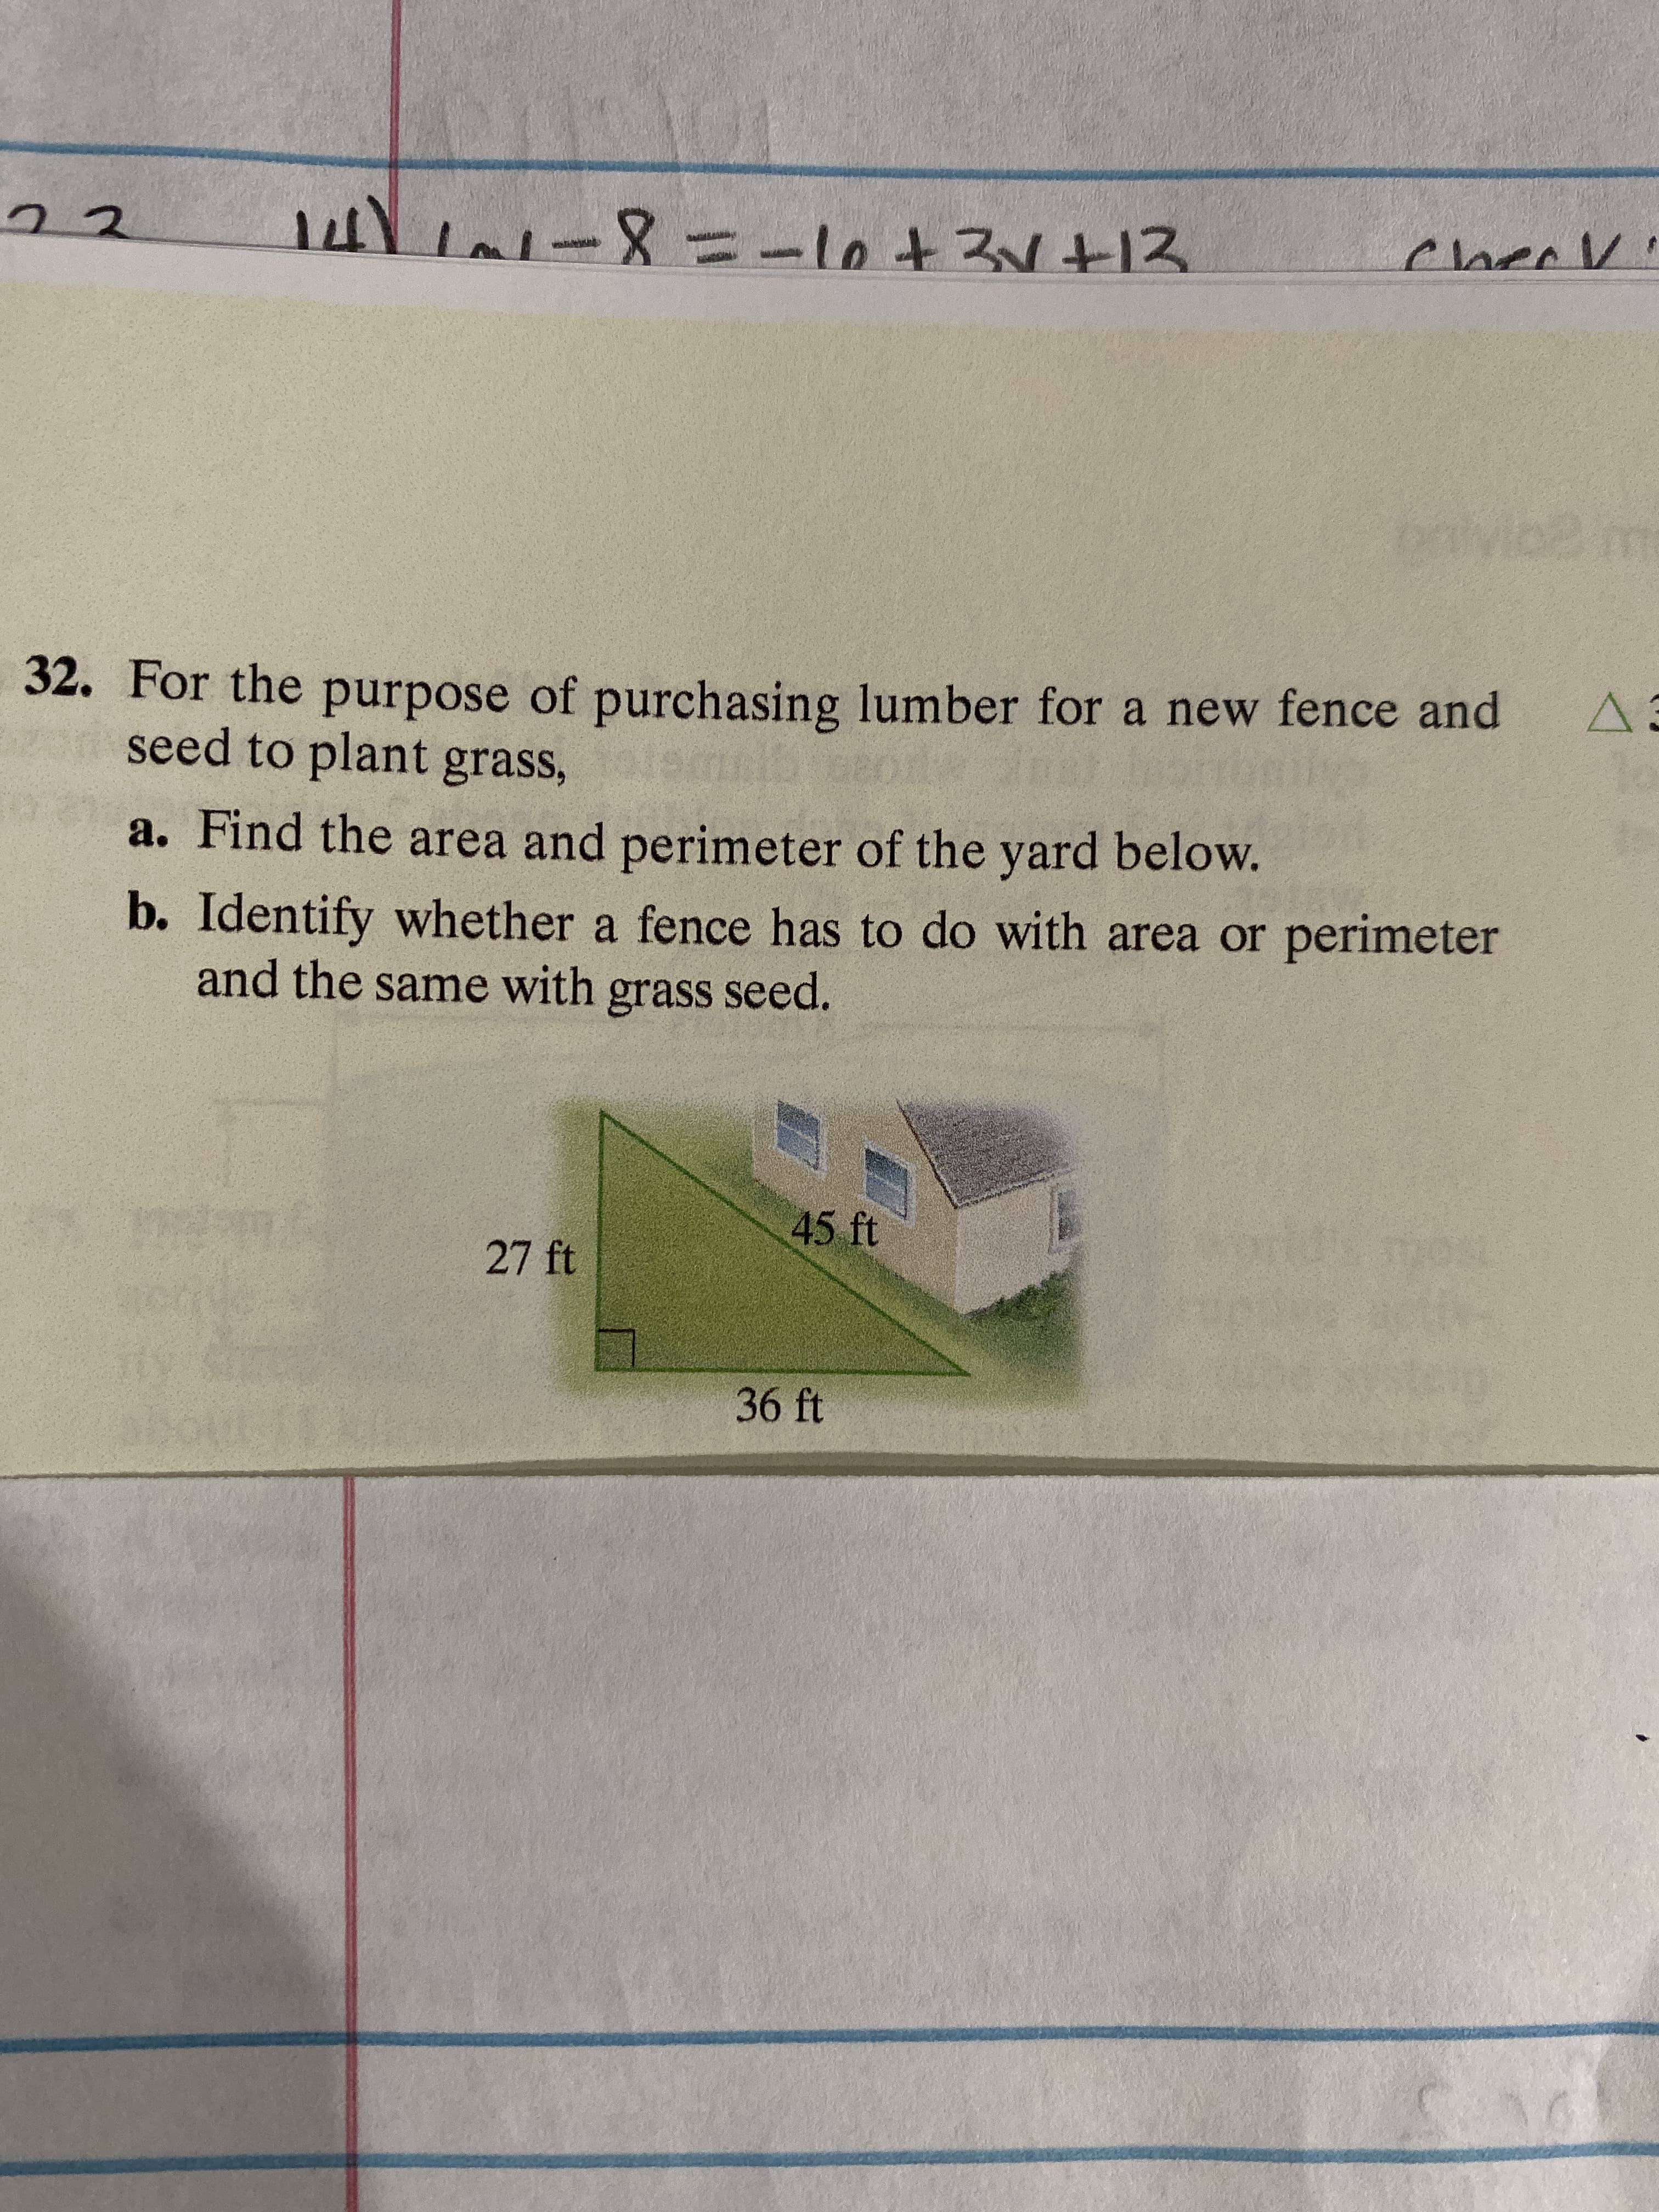 2
-8-1ot212
Claee
w
Mo2 n
32. For the purpose of purchasing lumber for a new fence and
seed to plant grass,
A.
033 01N
a. Find the area and perimeter of the yard below.
b. Identify whether a fence has to do with area or perimeter
and the same with grass seed.
45 ft
27 ft
36 ft
